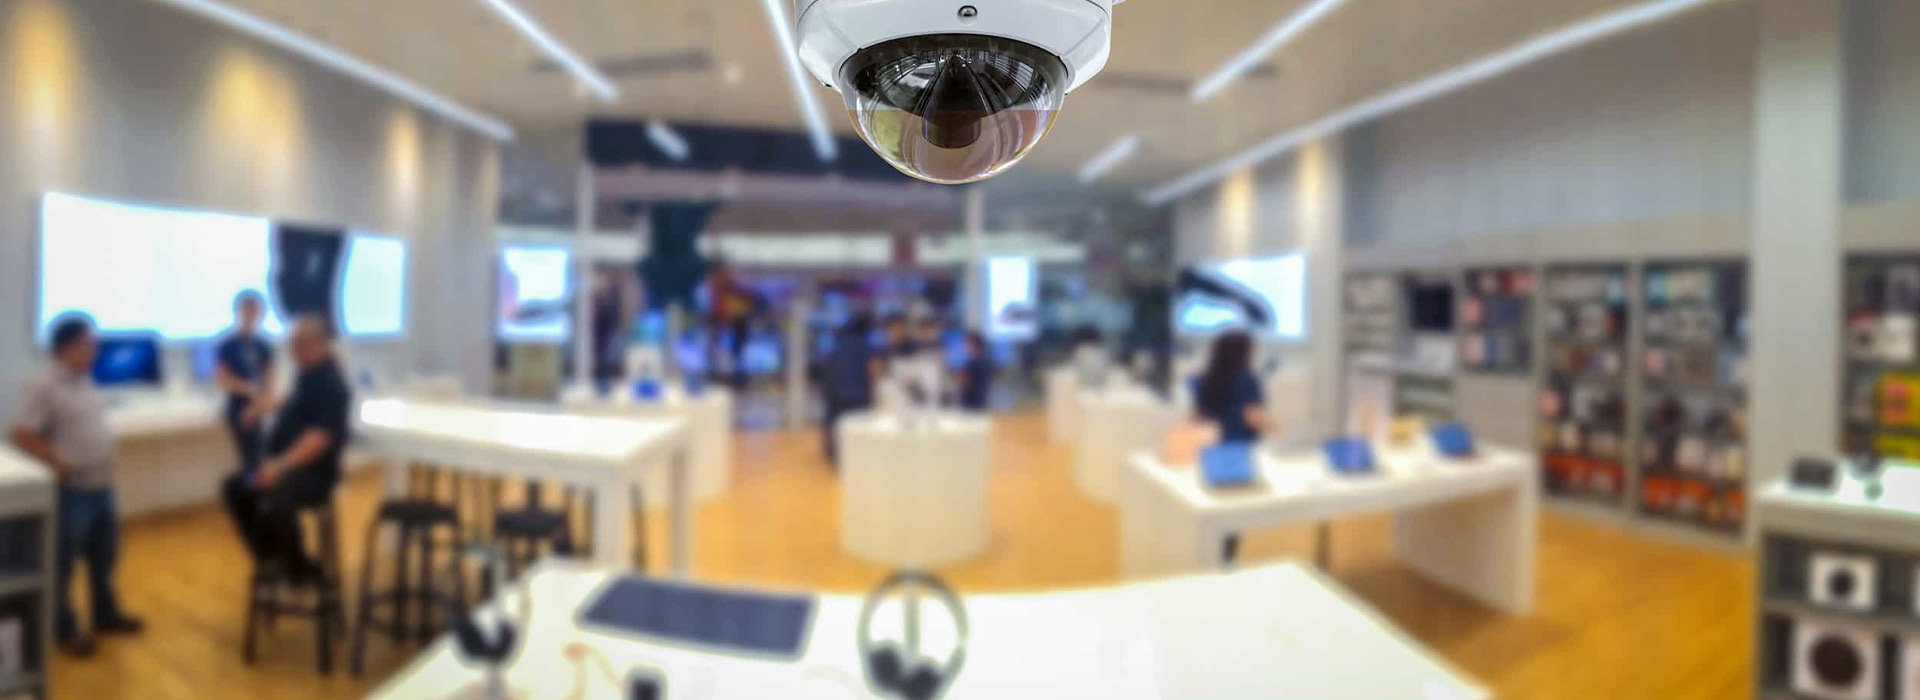 Security camera in store's ceiling